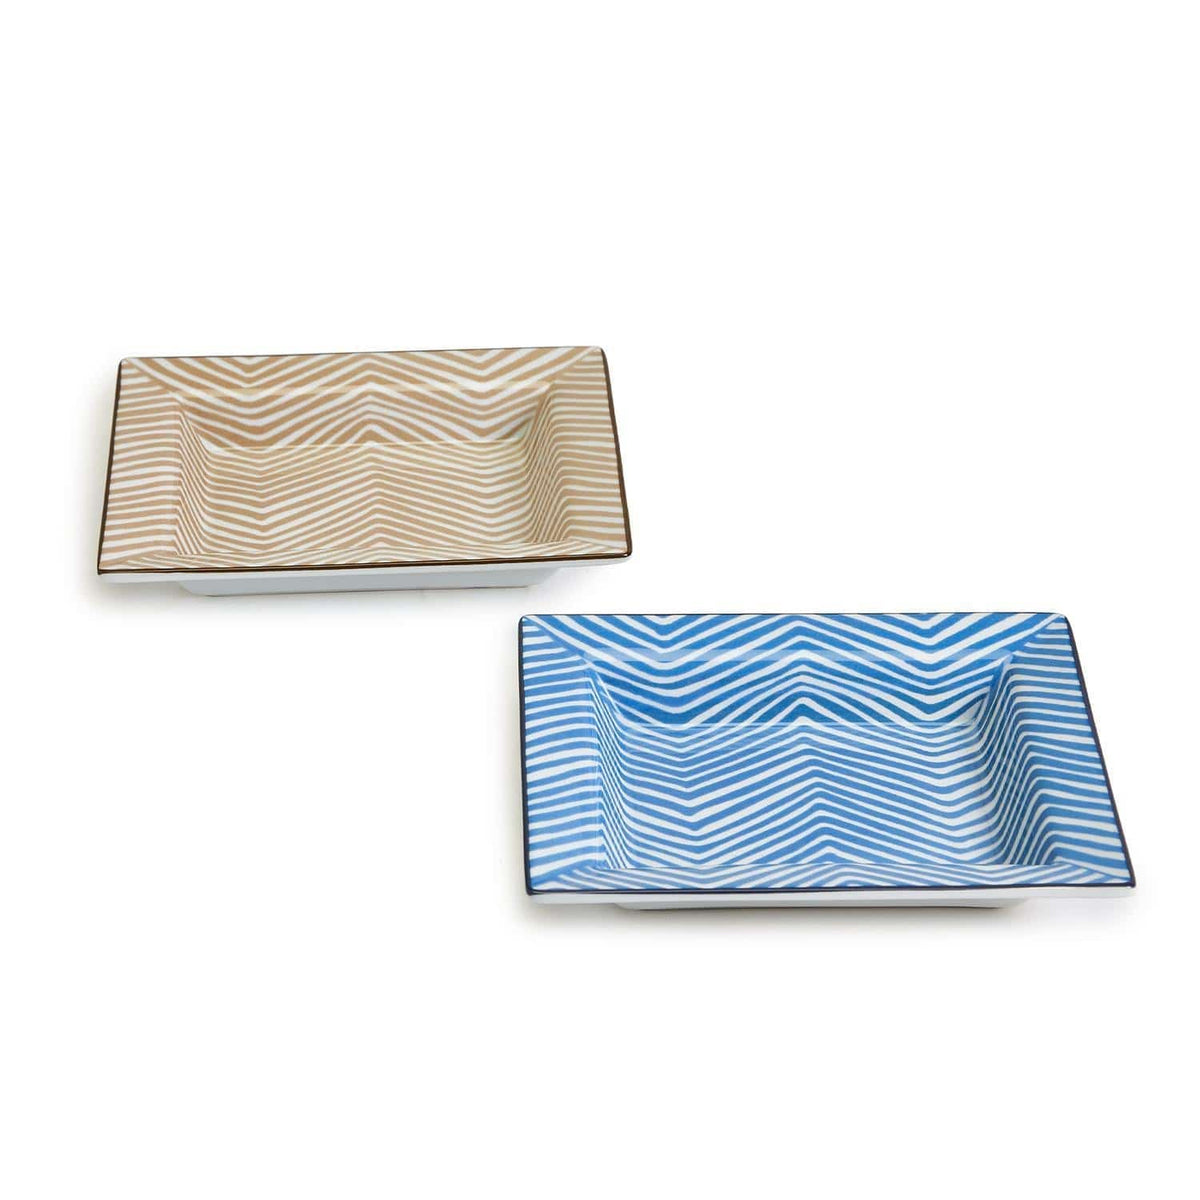 Herringbone Pattern Porcelain Decorative Tray in 2 Colors: Camel, French Blue - The Preppy Bunny